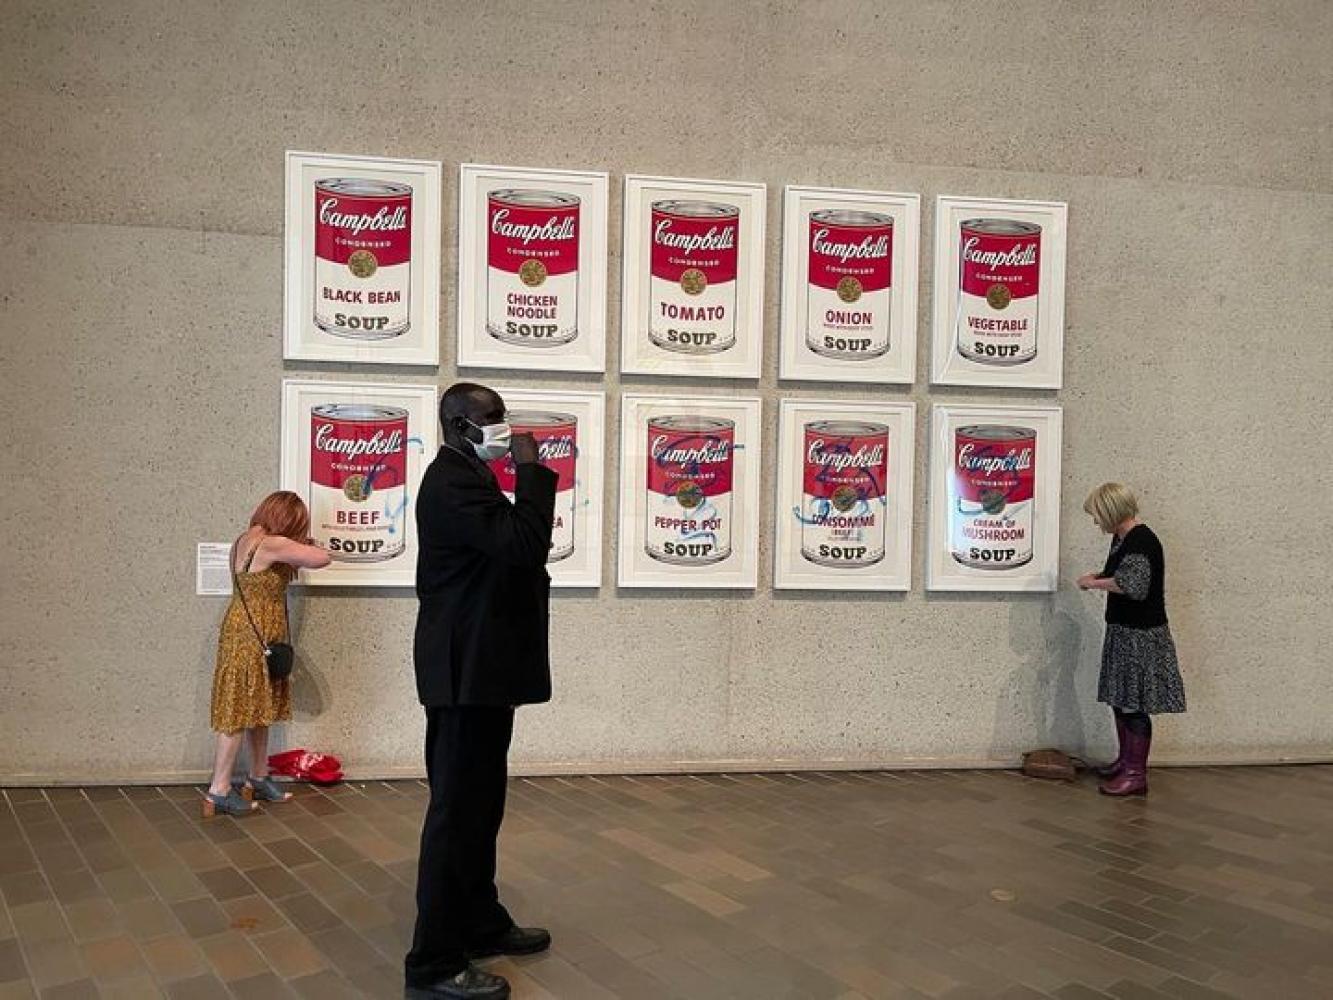 Aktion in der National Gallery of Australia (NGA) in Canberra an Andy Warhol's "Campbell’s Soup I" 